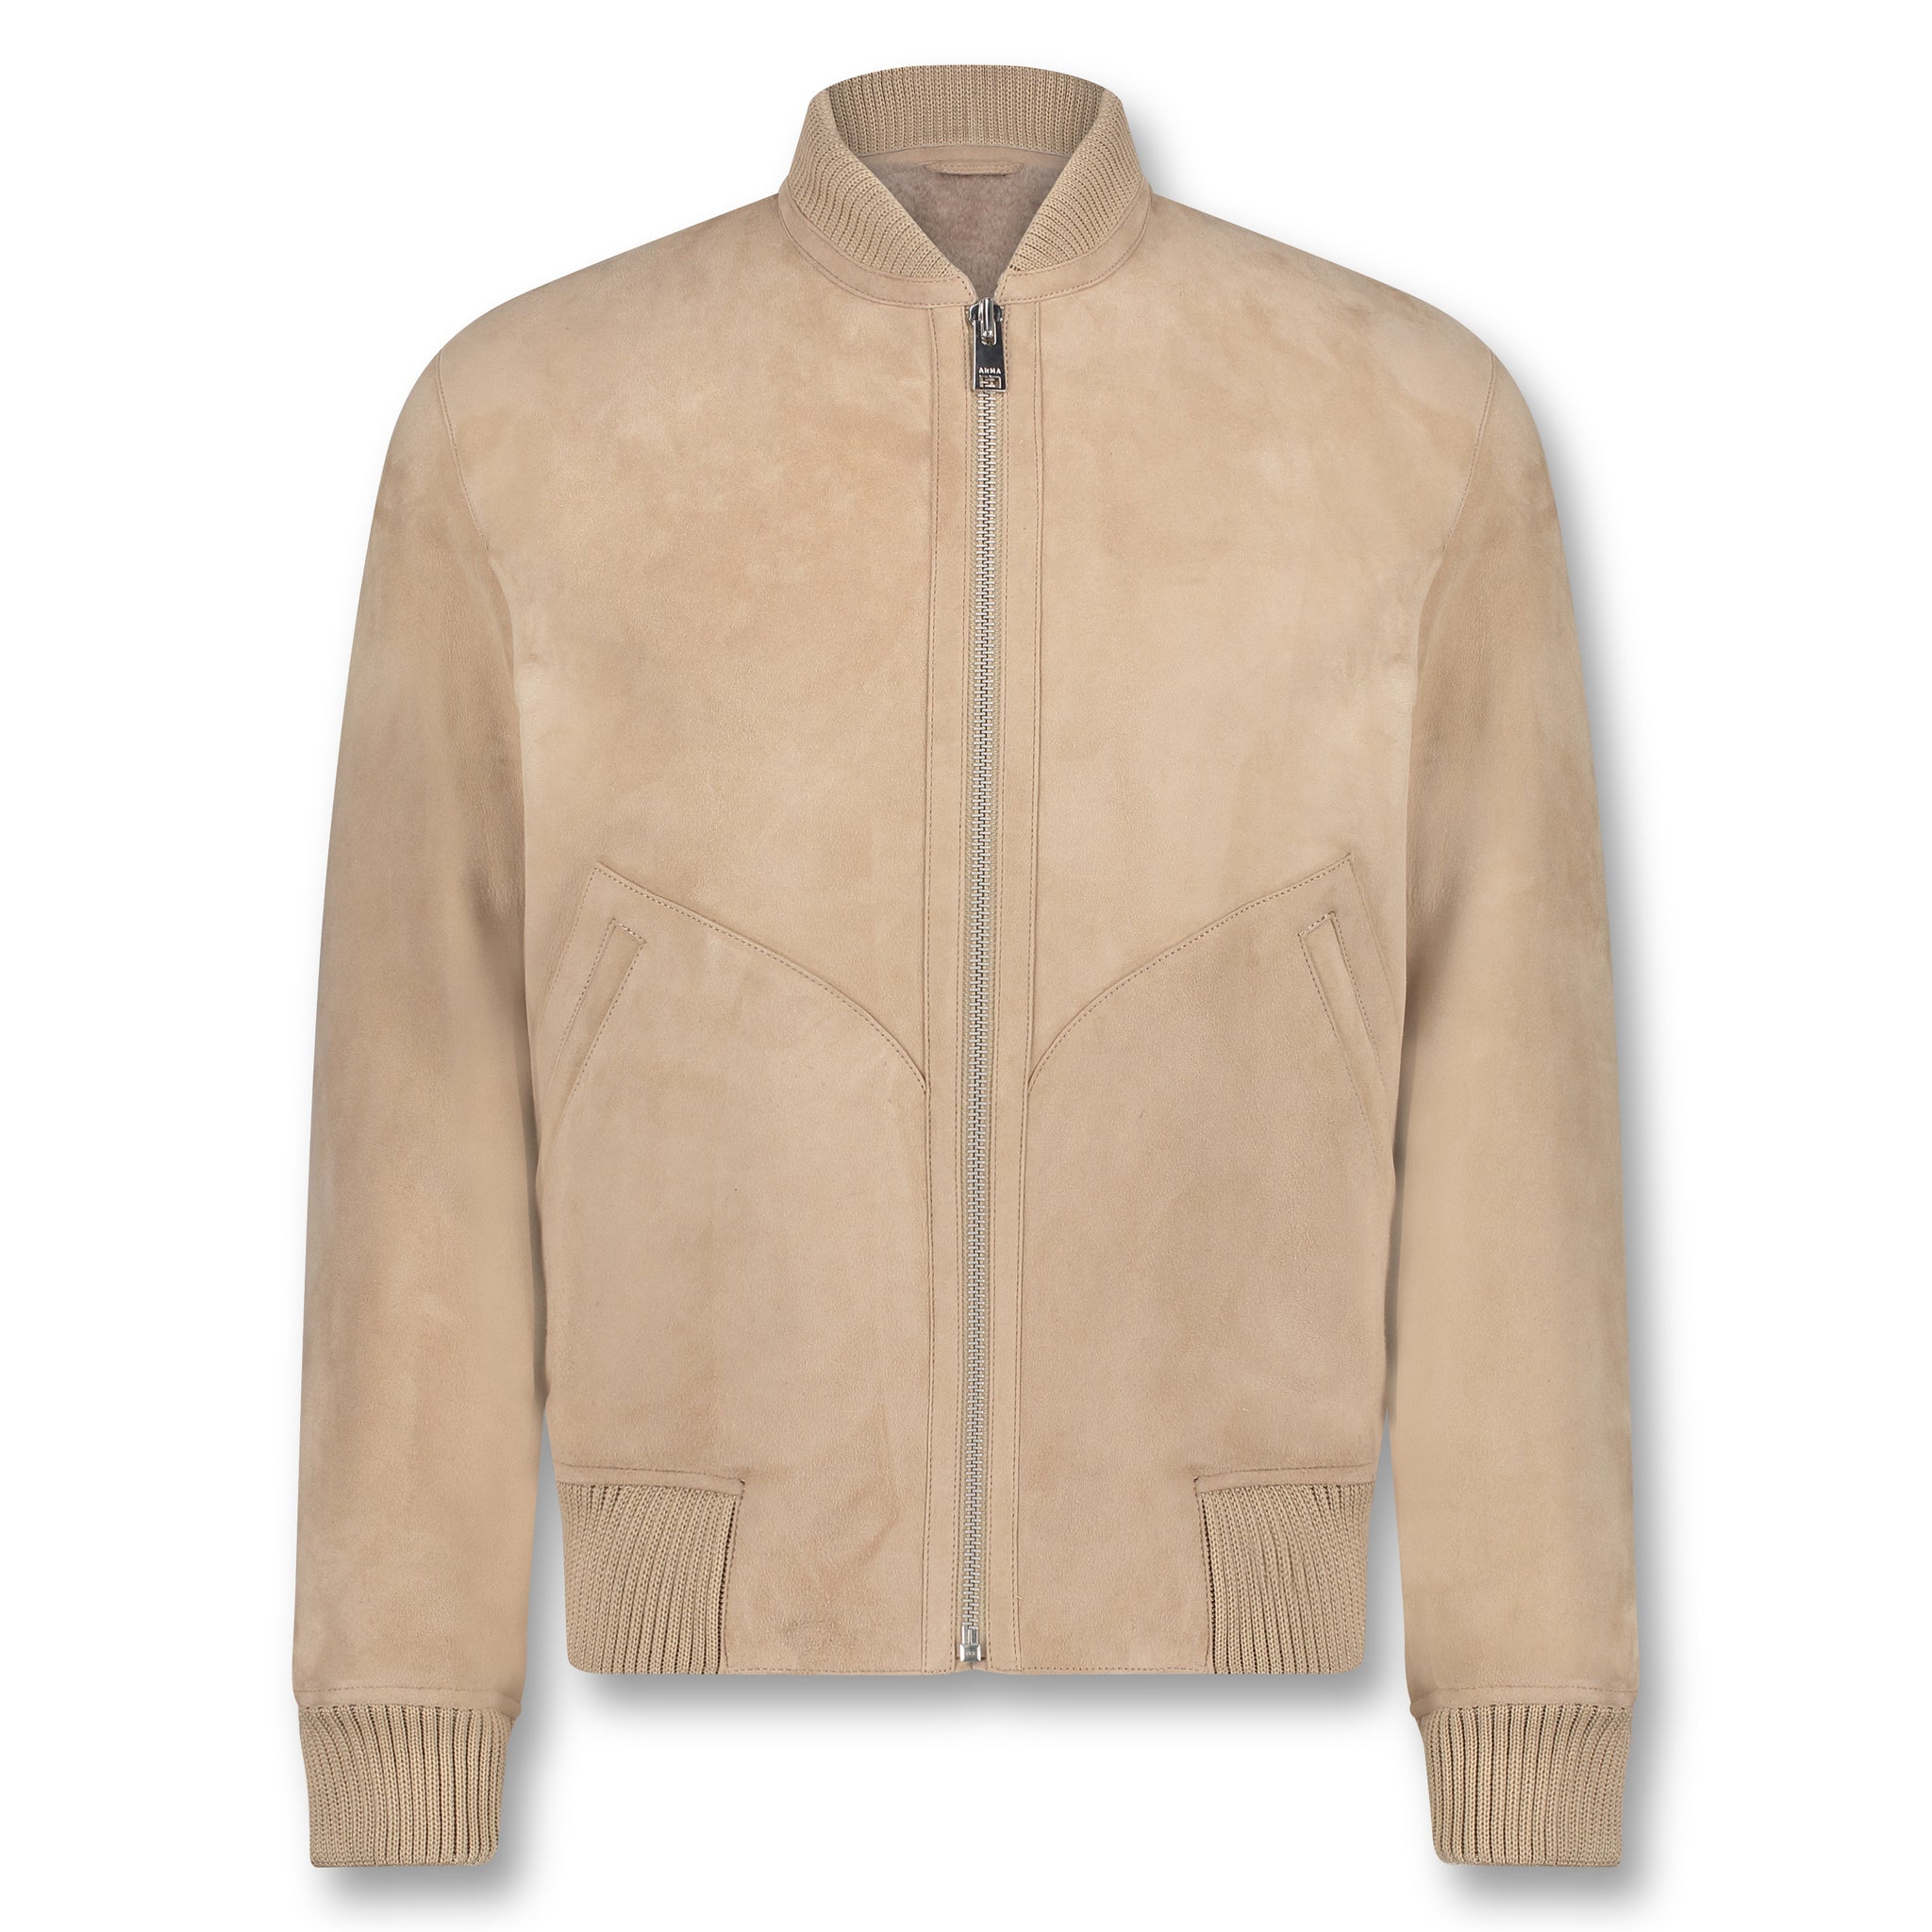 GISS | Suede shearling bomber jacket